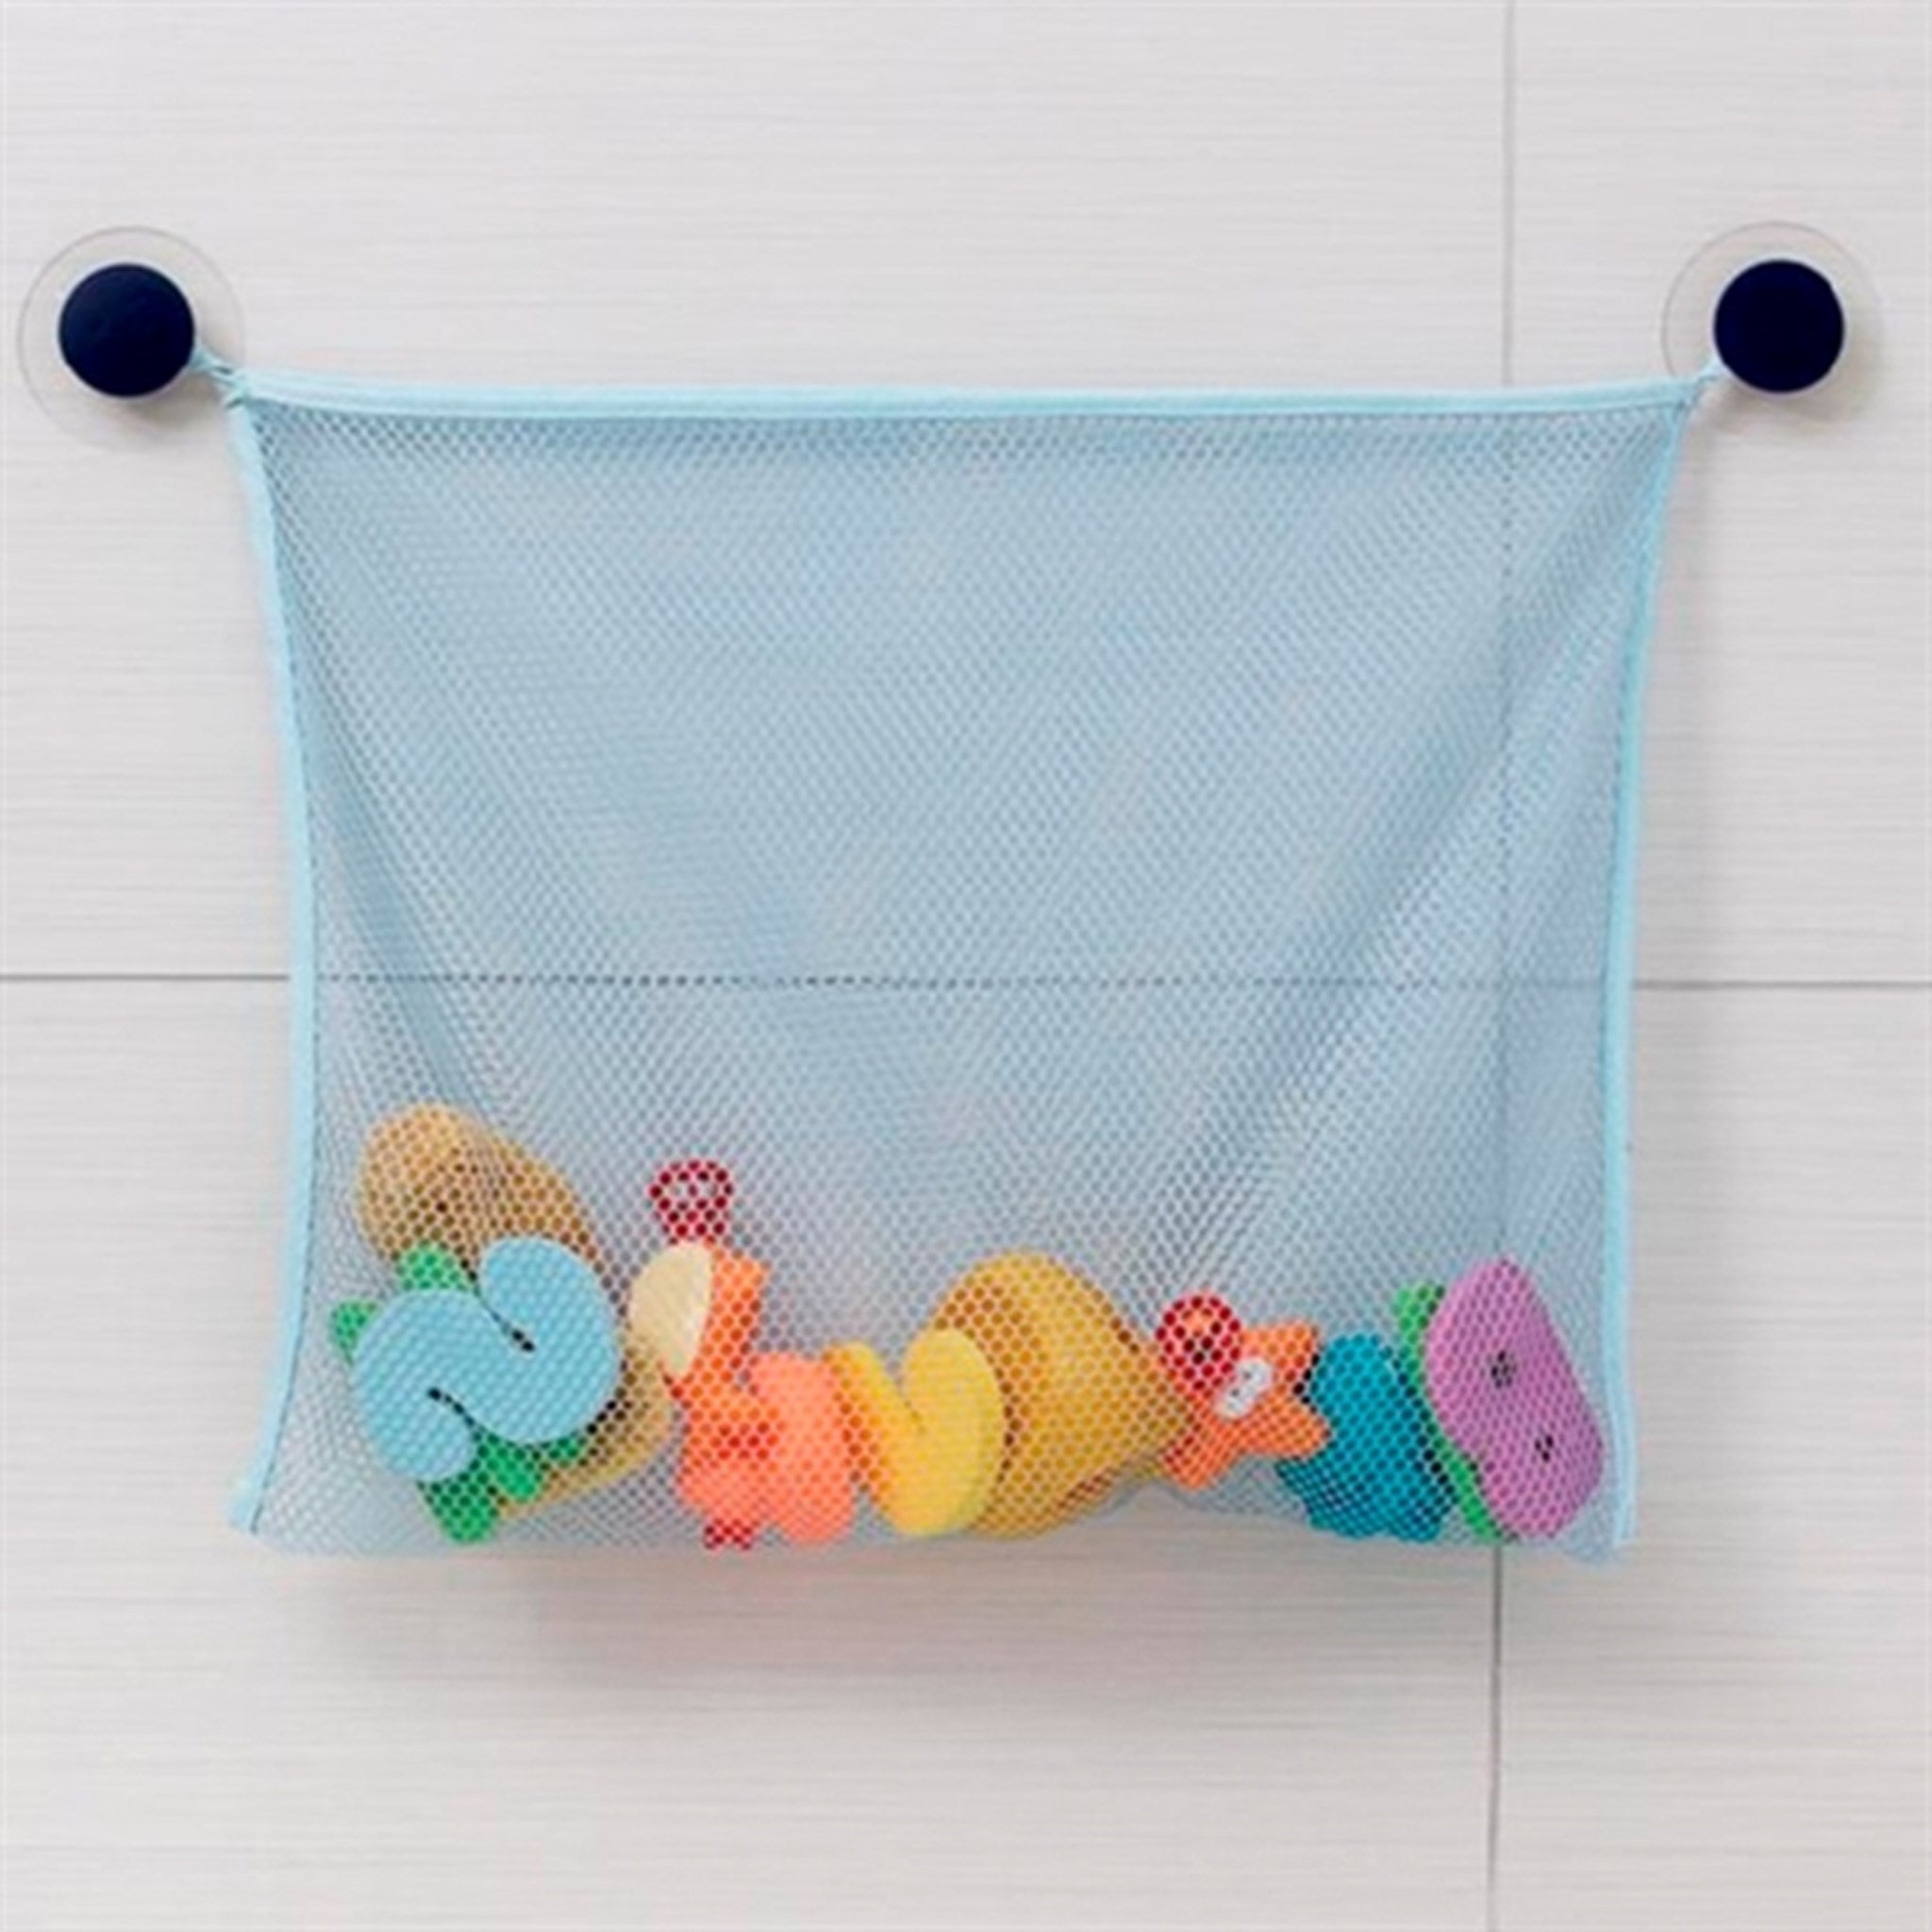 REER Storage Net for the Bath 3